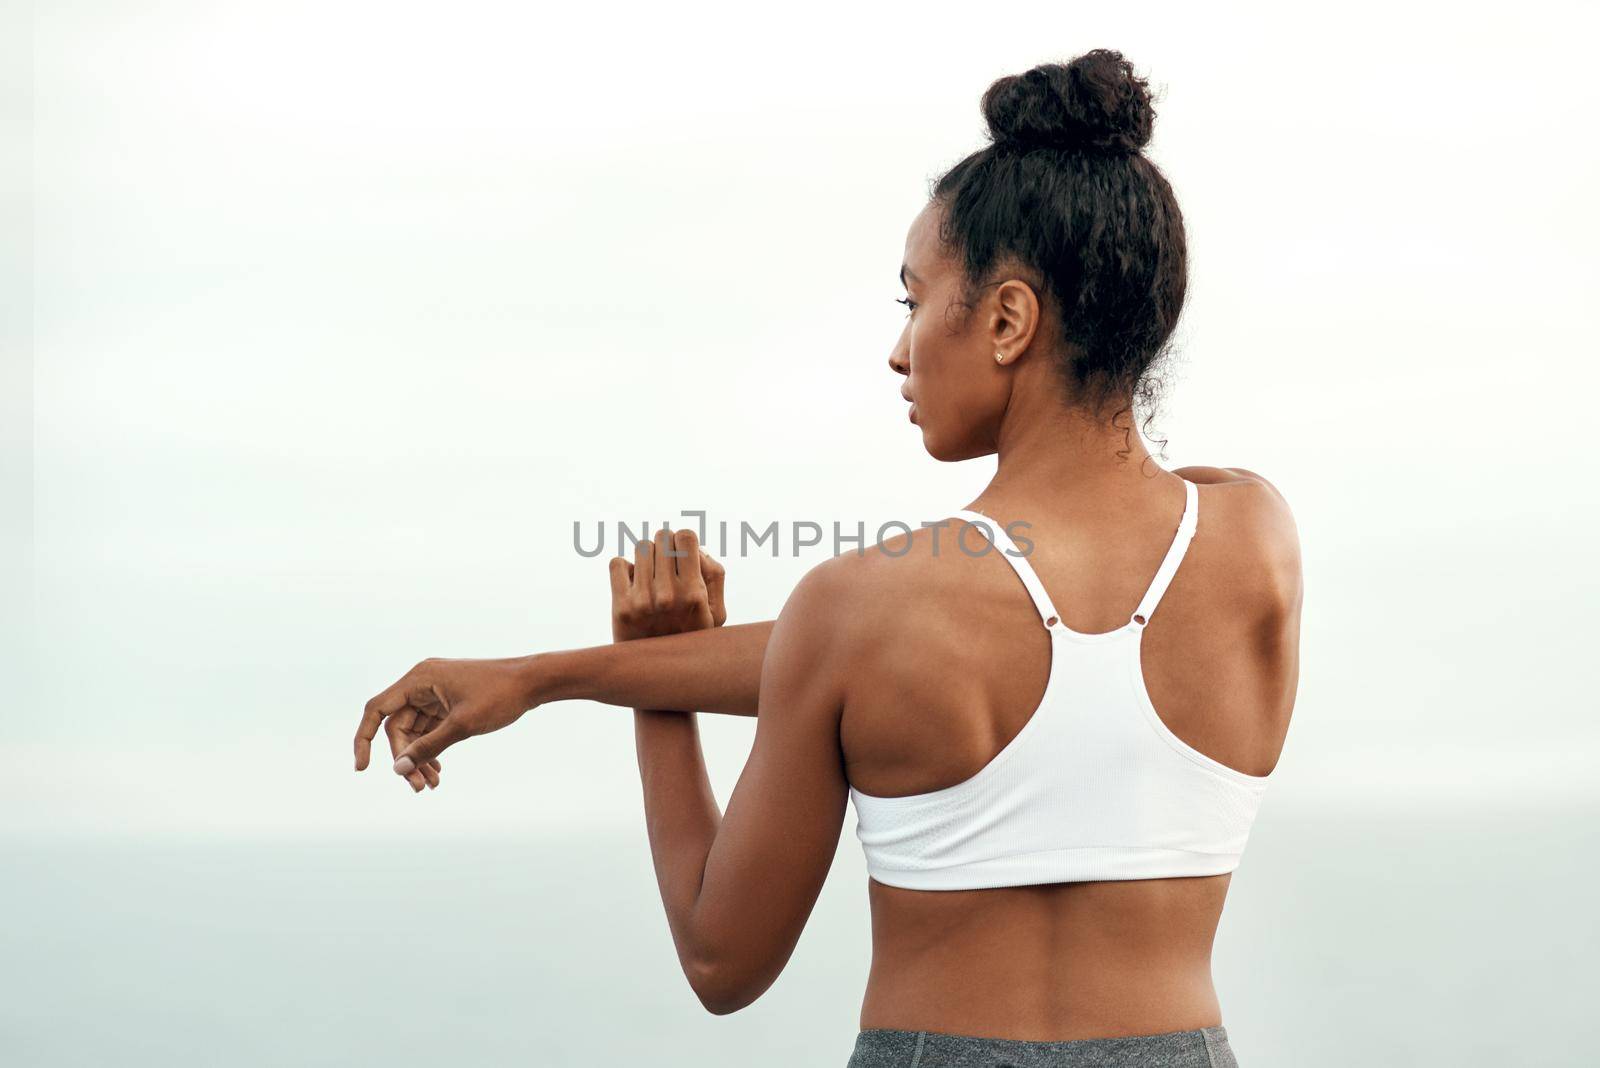 Change will come through every movement. Rearview shot of a sporty young woman stretching her arms while exercising outdoors